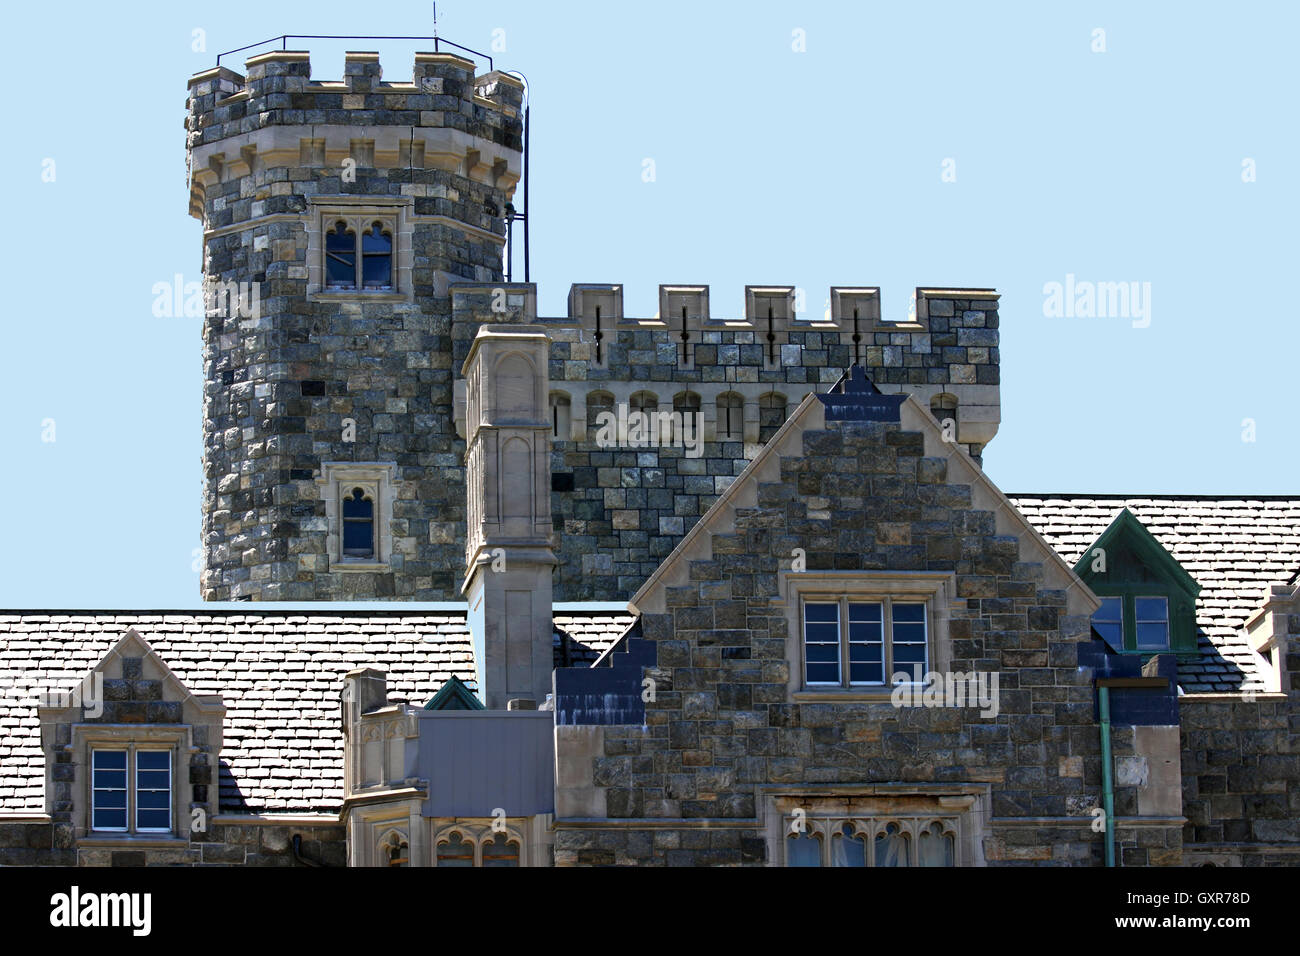 Hempstead House castle and museum Sands Point Preserve Long Island New York Stock Photo